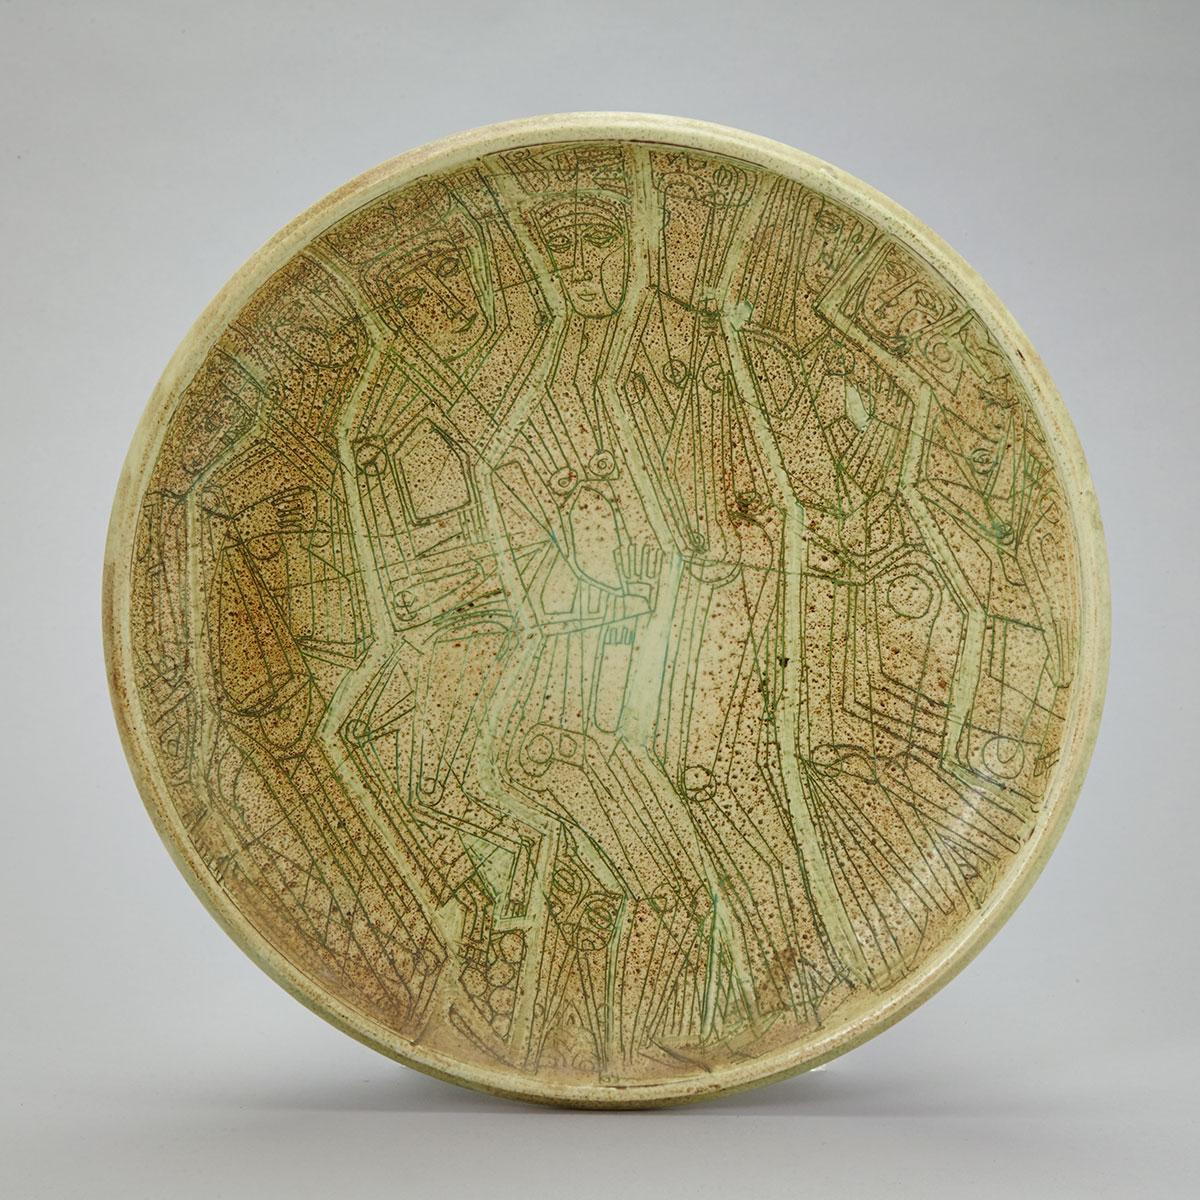 Brooklin Pottery Plate, Theo and Susan Harlander, c.1960